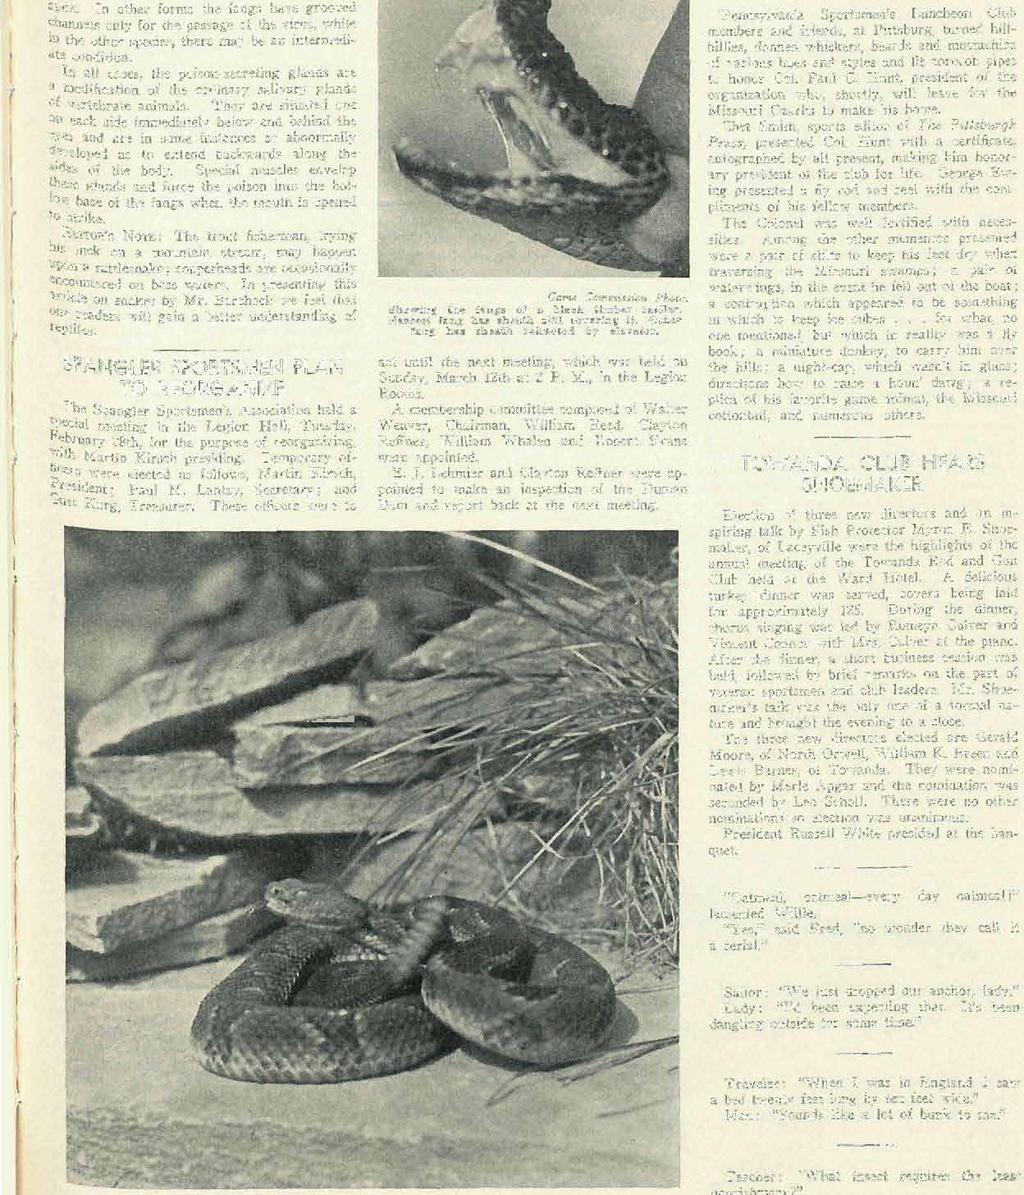 1939 PENNSYLVANIA ANGLER 11 snakes, the poison fangs are tubular in character, the poison being received from the venom glands at their open base and discharged at the a Pex.